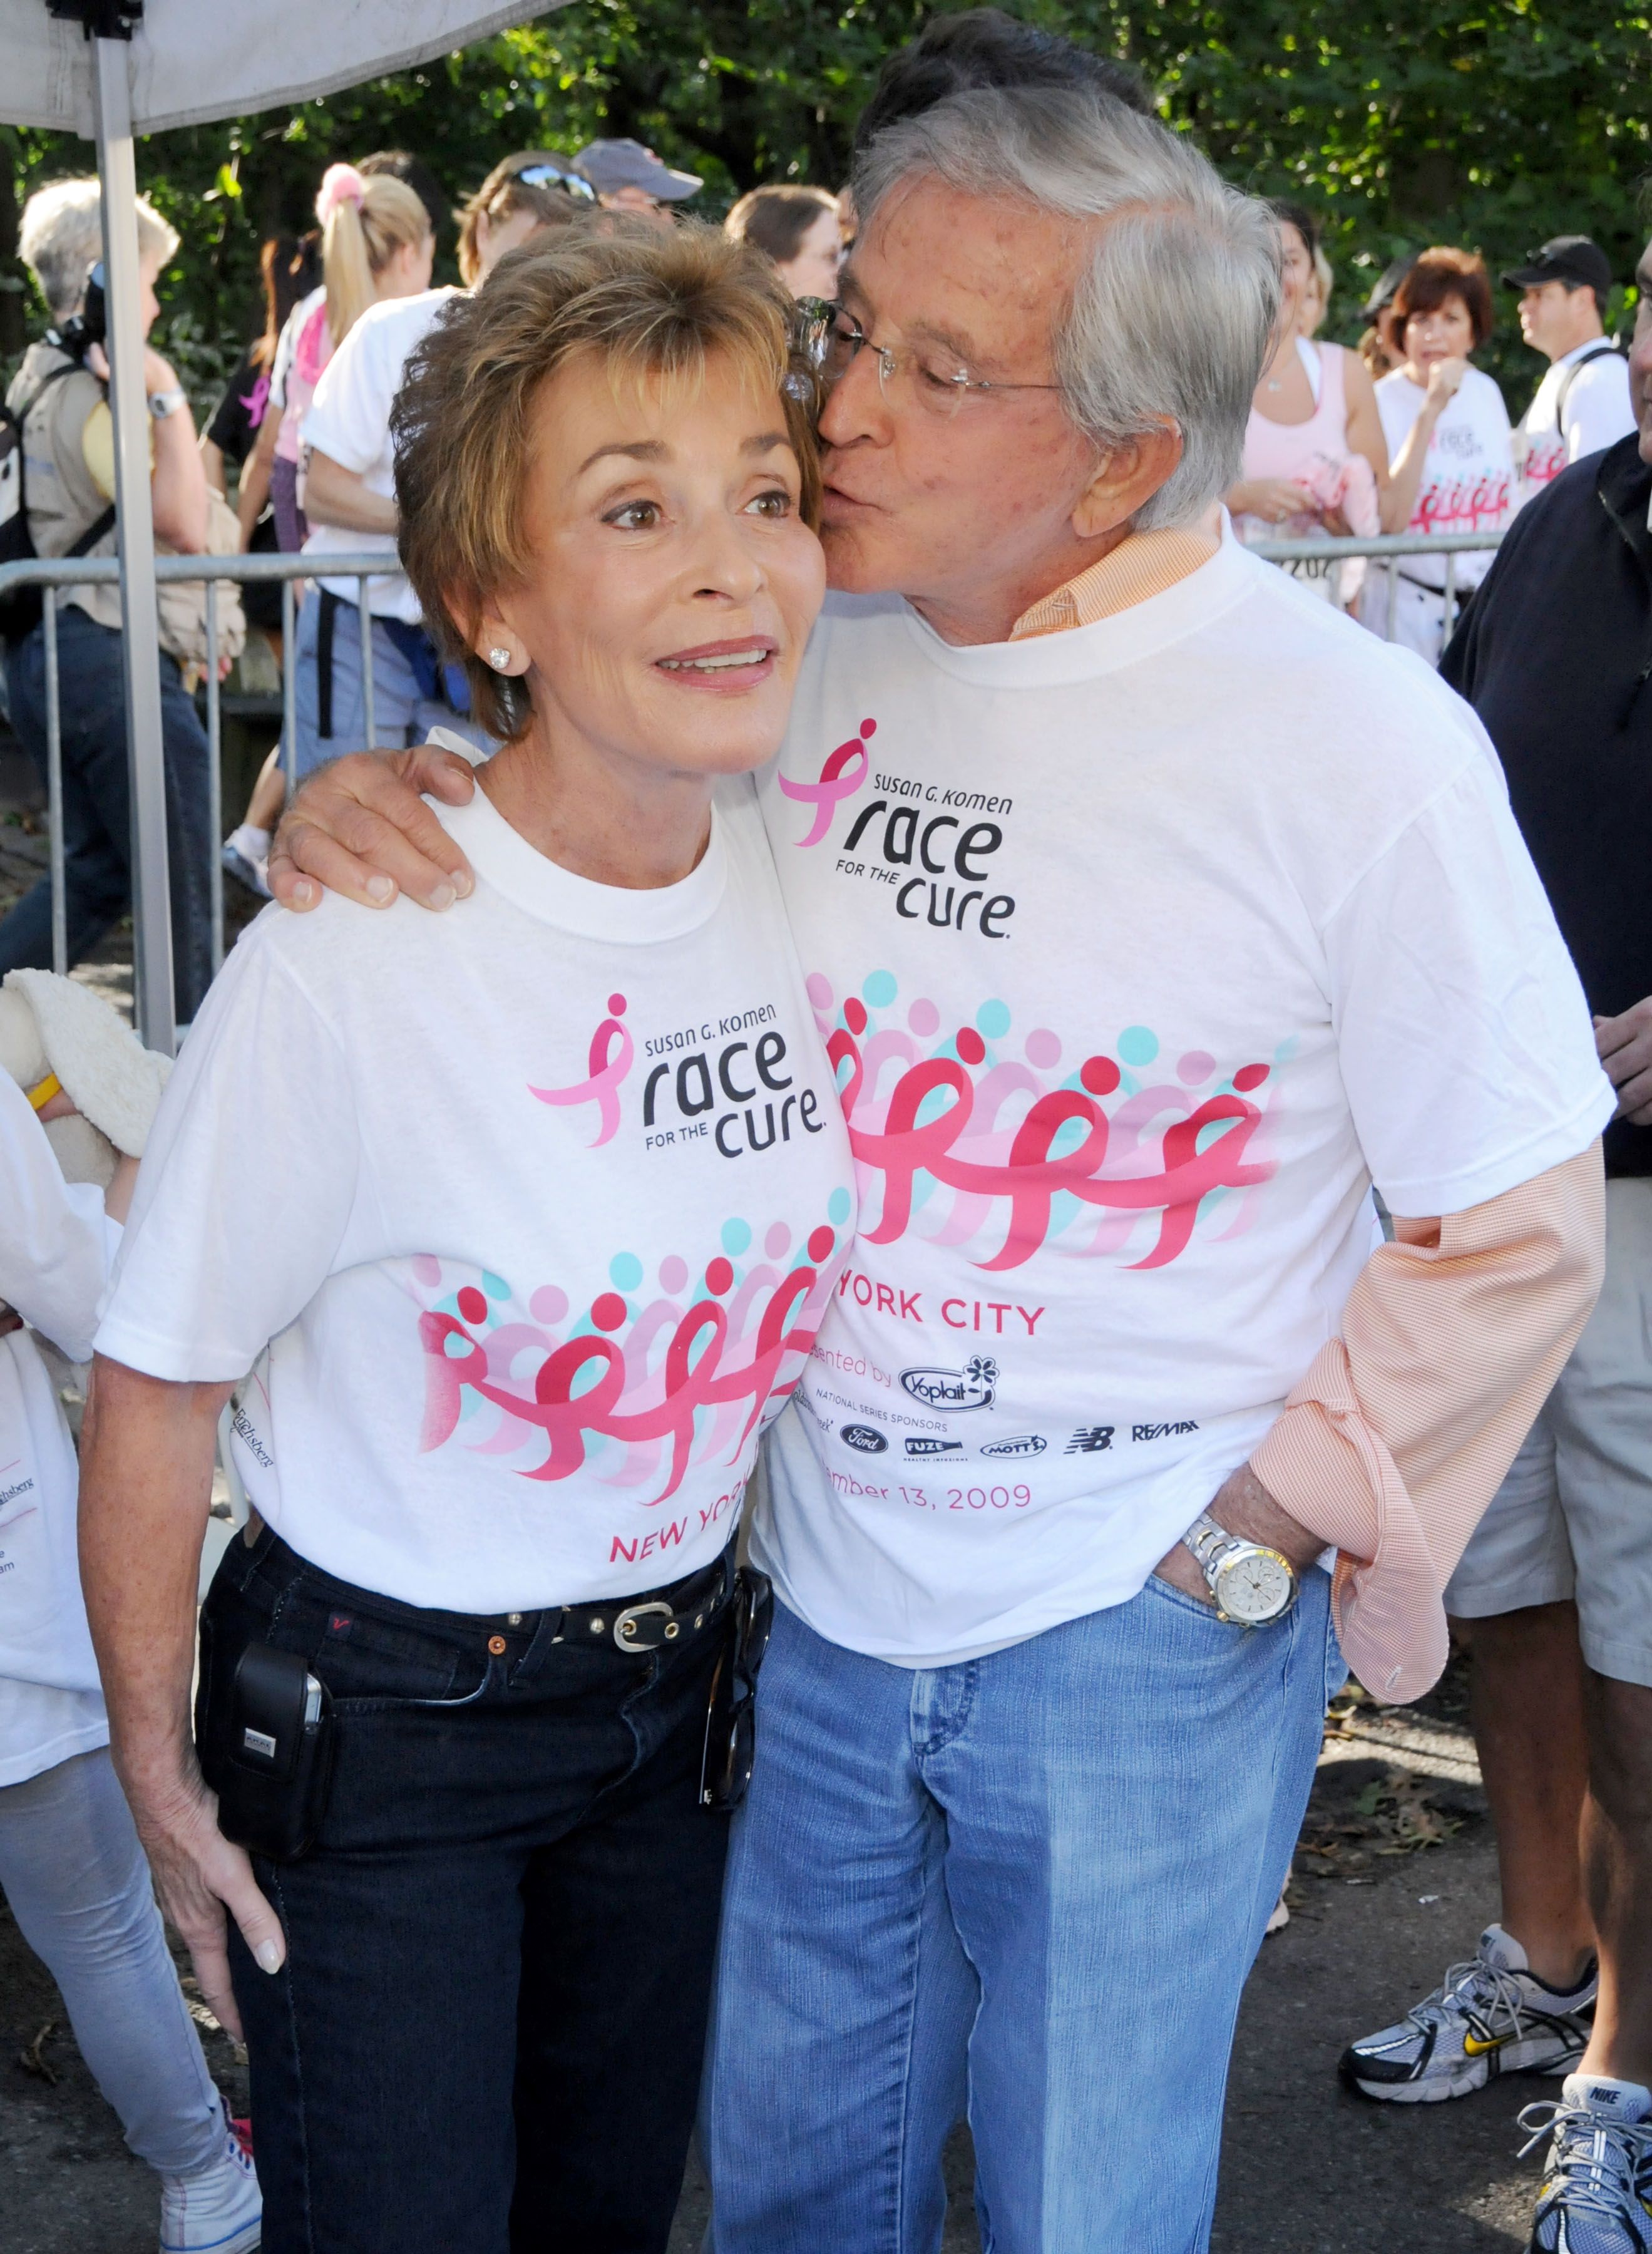 Judy und Jerry Sheindlin beim Susan G. Komen New York City Race For The Cure in New York am 13. September 2009 | Quelle: Getty Images